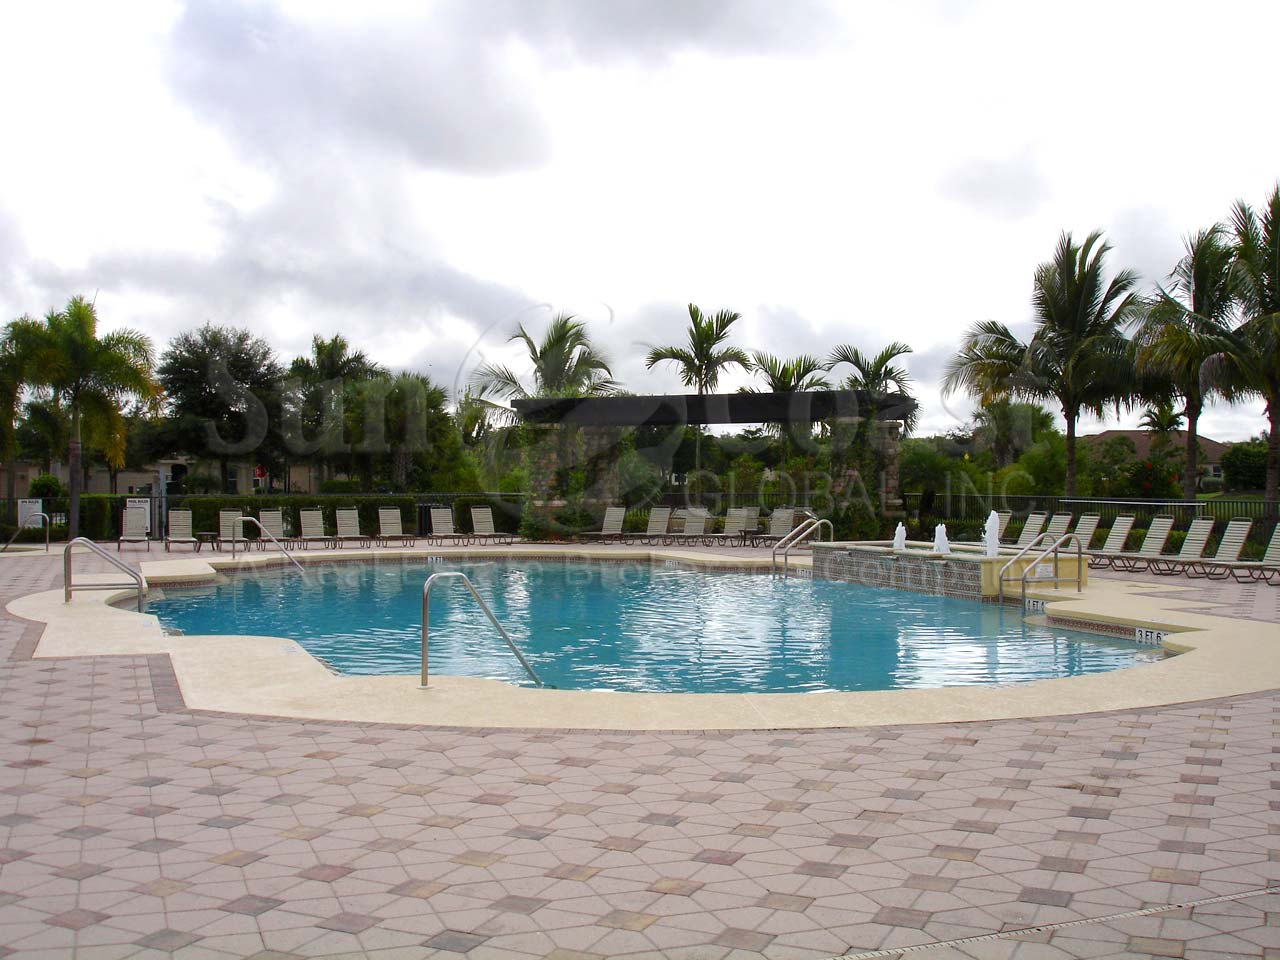 HERITAGE BAY Golf and Country Club fitness center and pool area